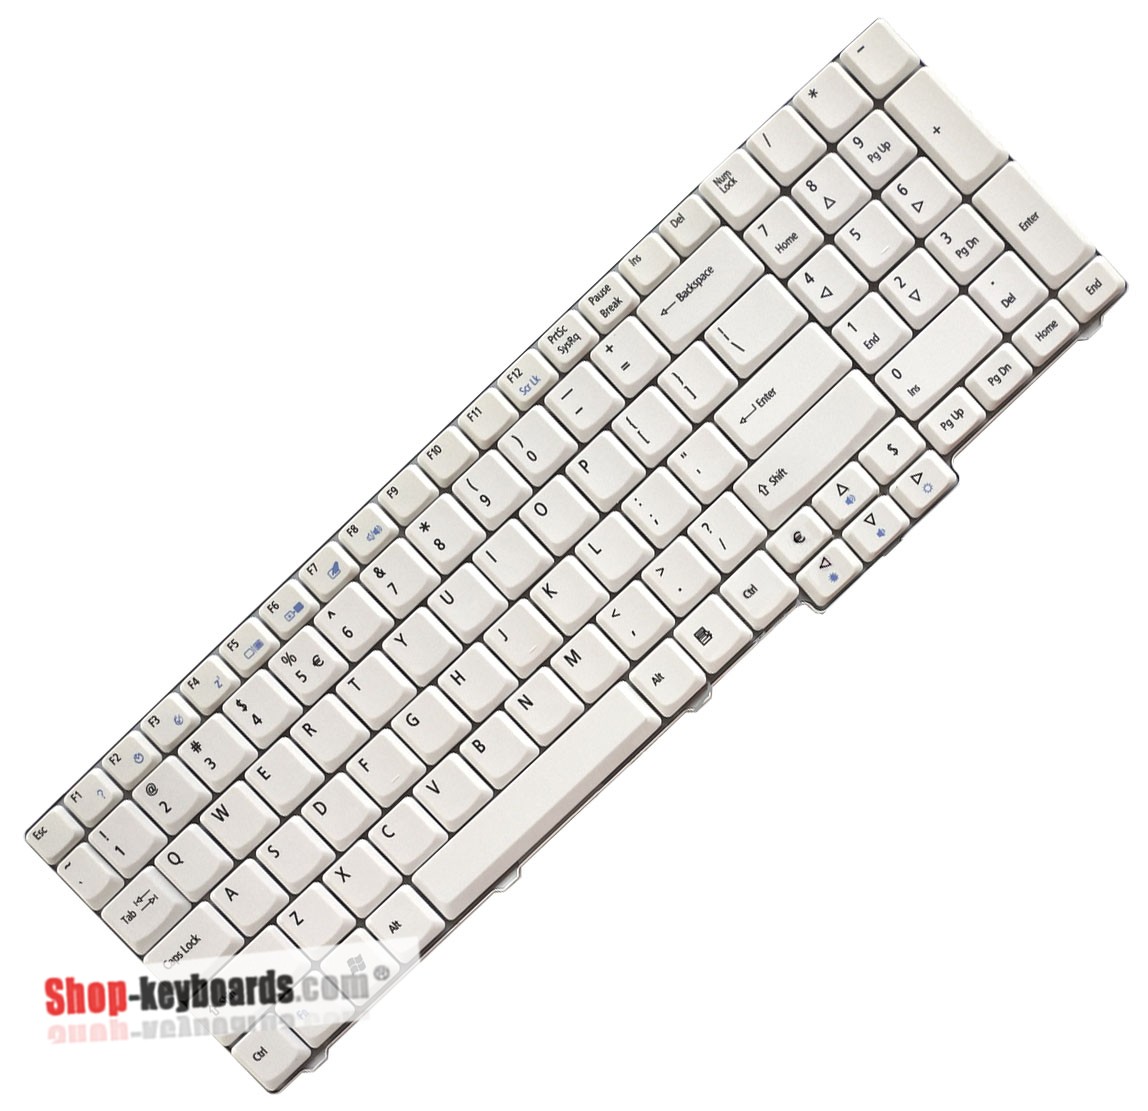 Acer Aspire 8730G Keyboard replacement